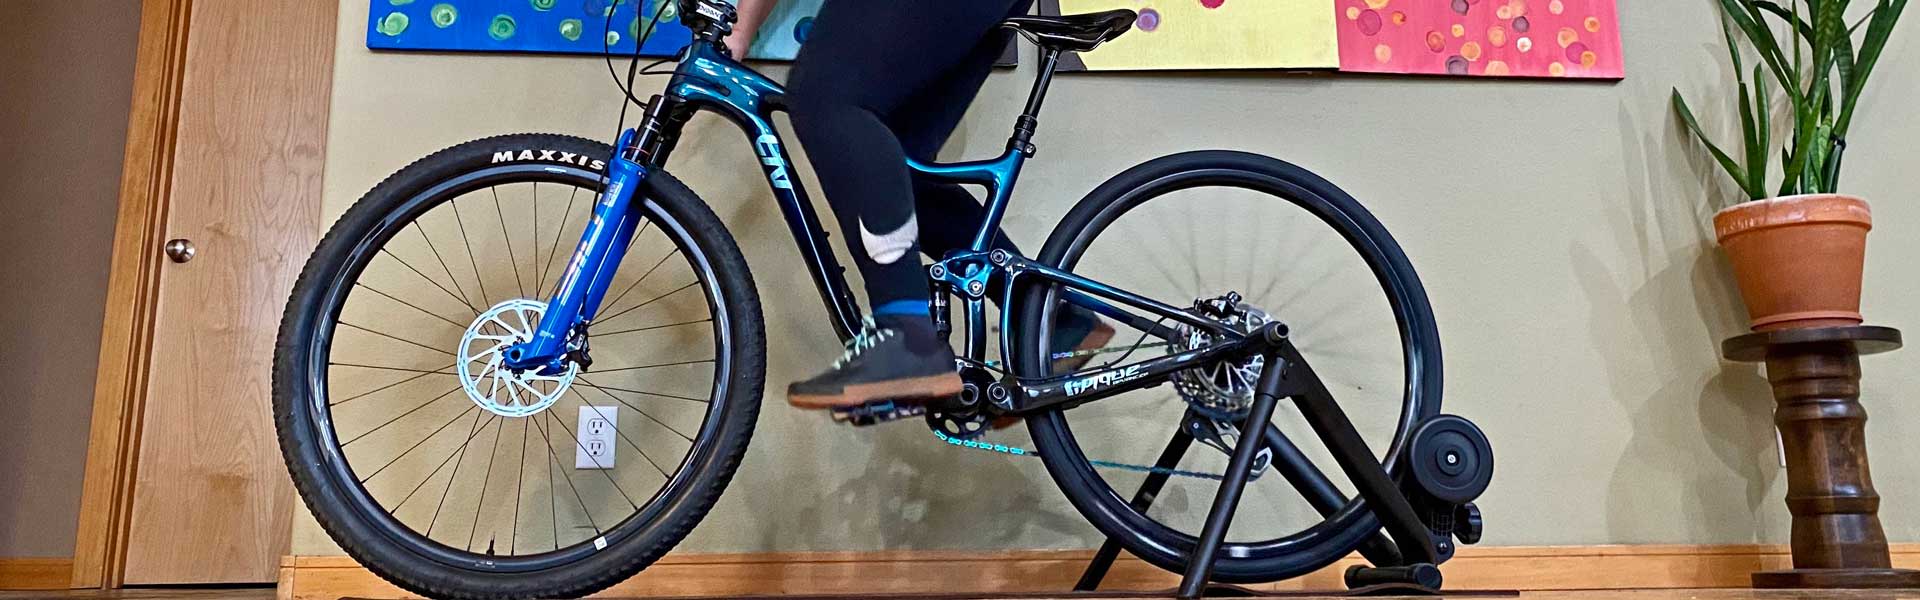 How to Set Up a Mountain Bike for Indoor Training